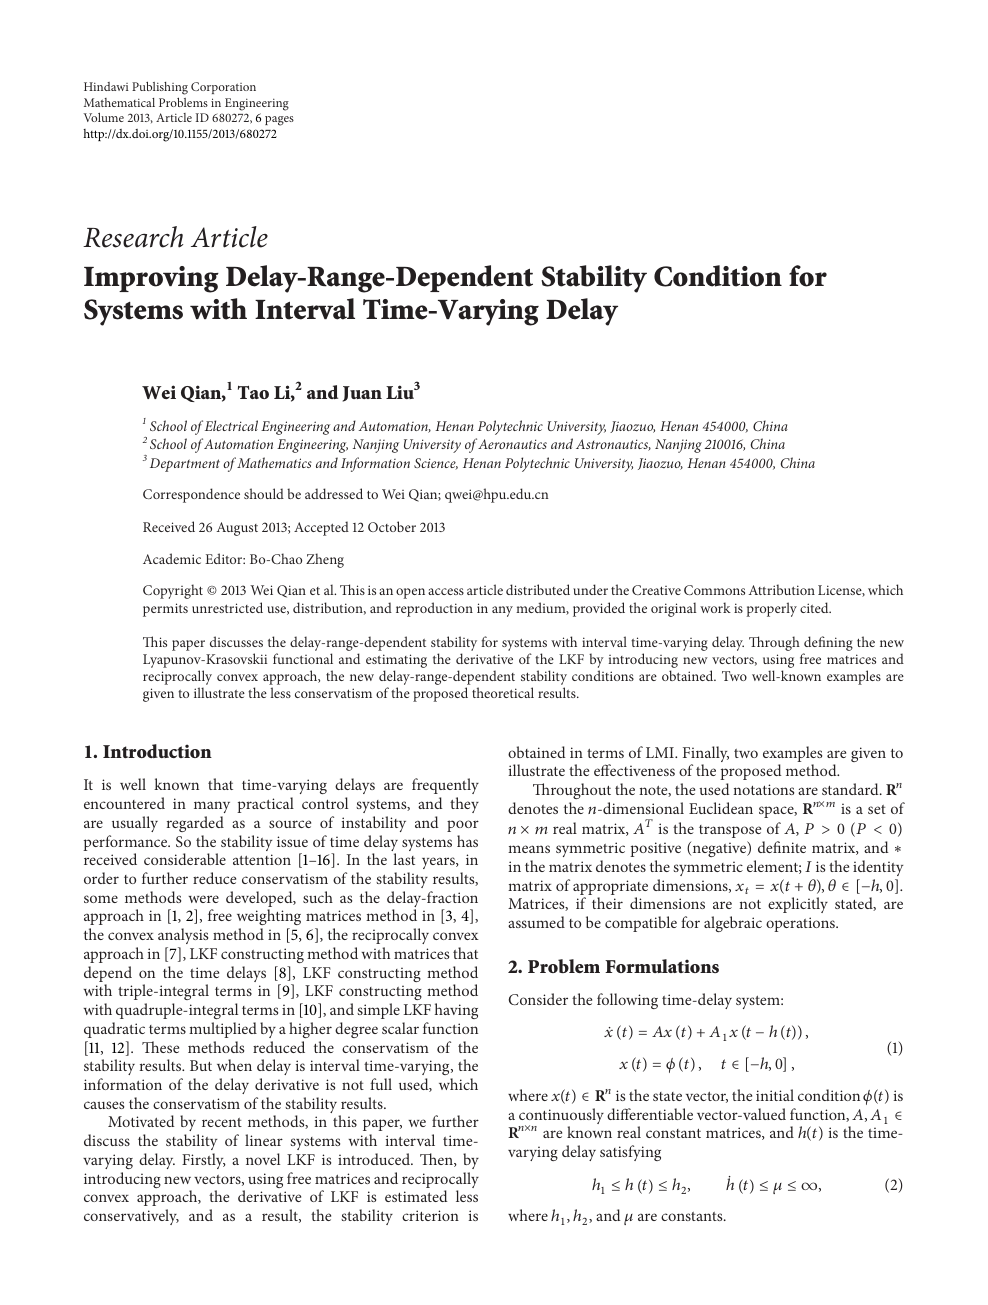 Improving Delay Range Dependent Stability Condition For Systems With Interval Time Varying Delay Topic Of Research Paper In Mathematics Download Scholarly Article Pdf And Read For Free On Cyberleninka Open Science Hub